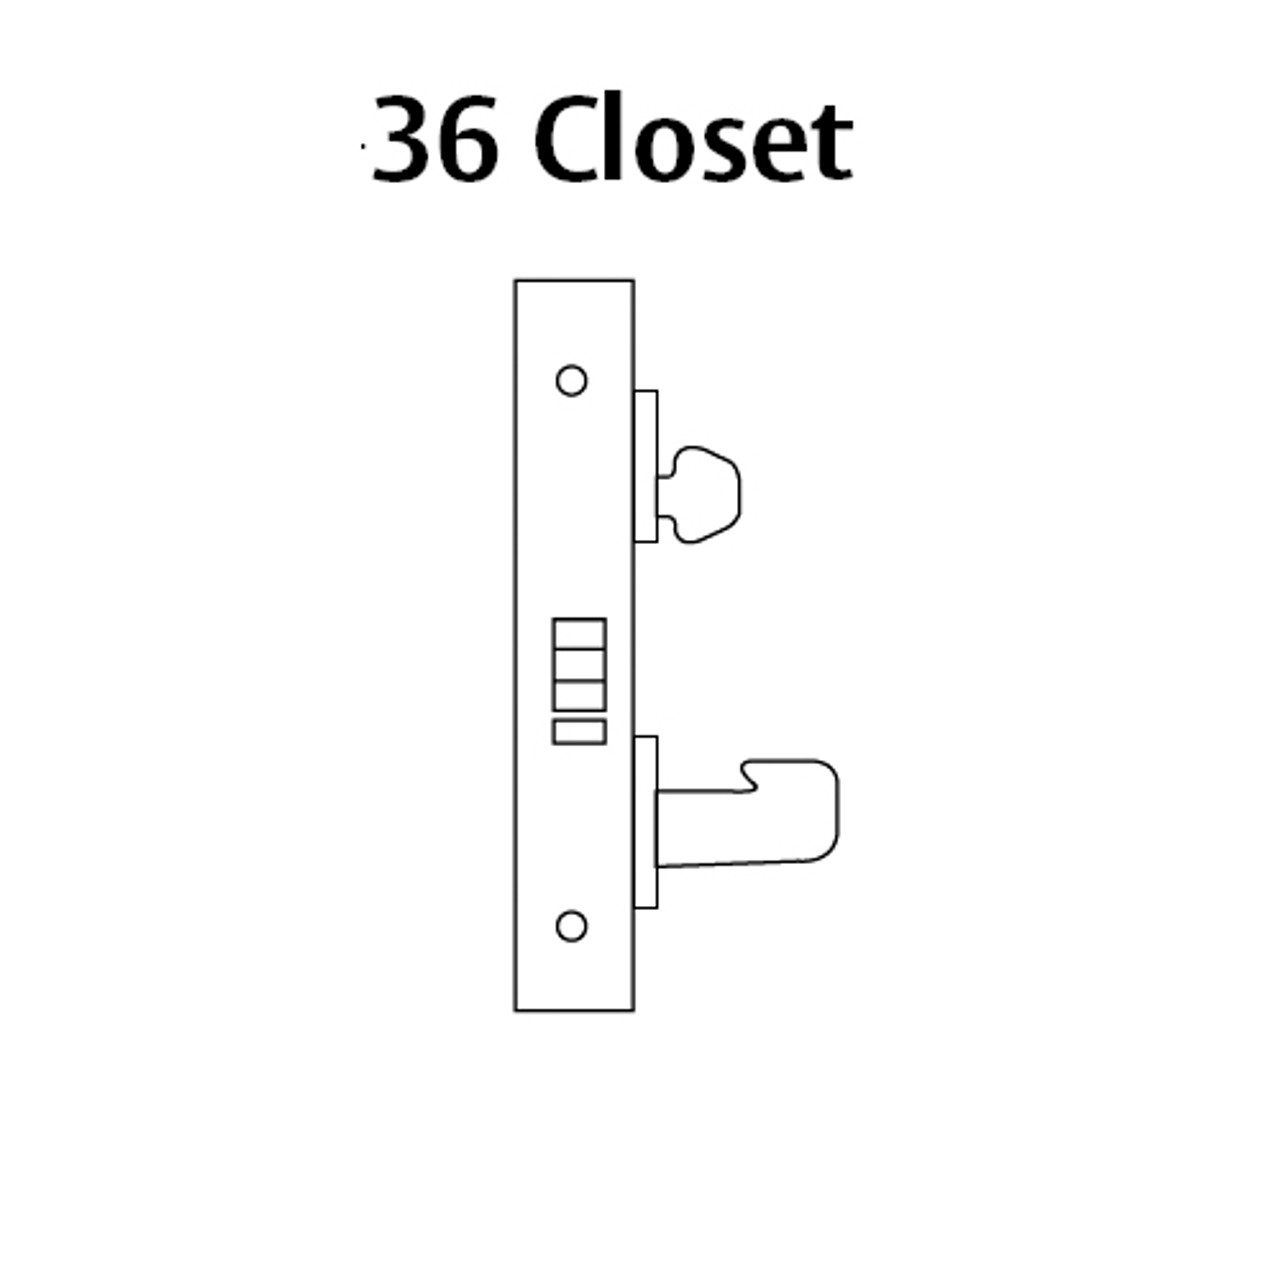 LC-8236-LNW-10 Sargent 8200 Series Closet Mortise Lock with LNW Lever Trim Less Cylinder in Dull Bronze